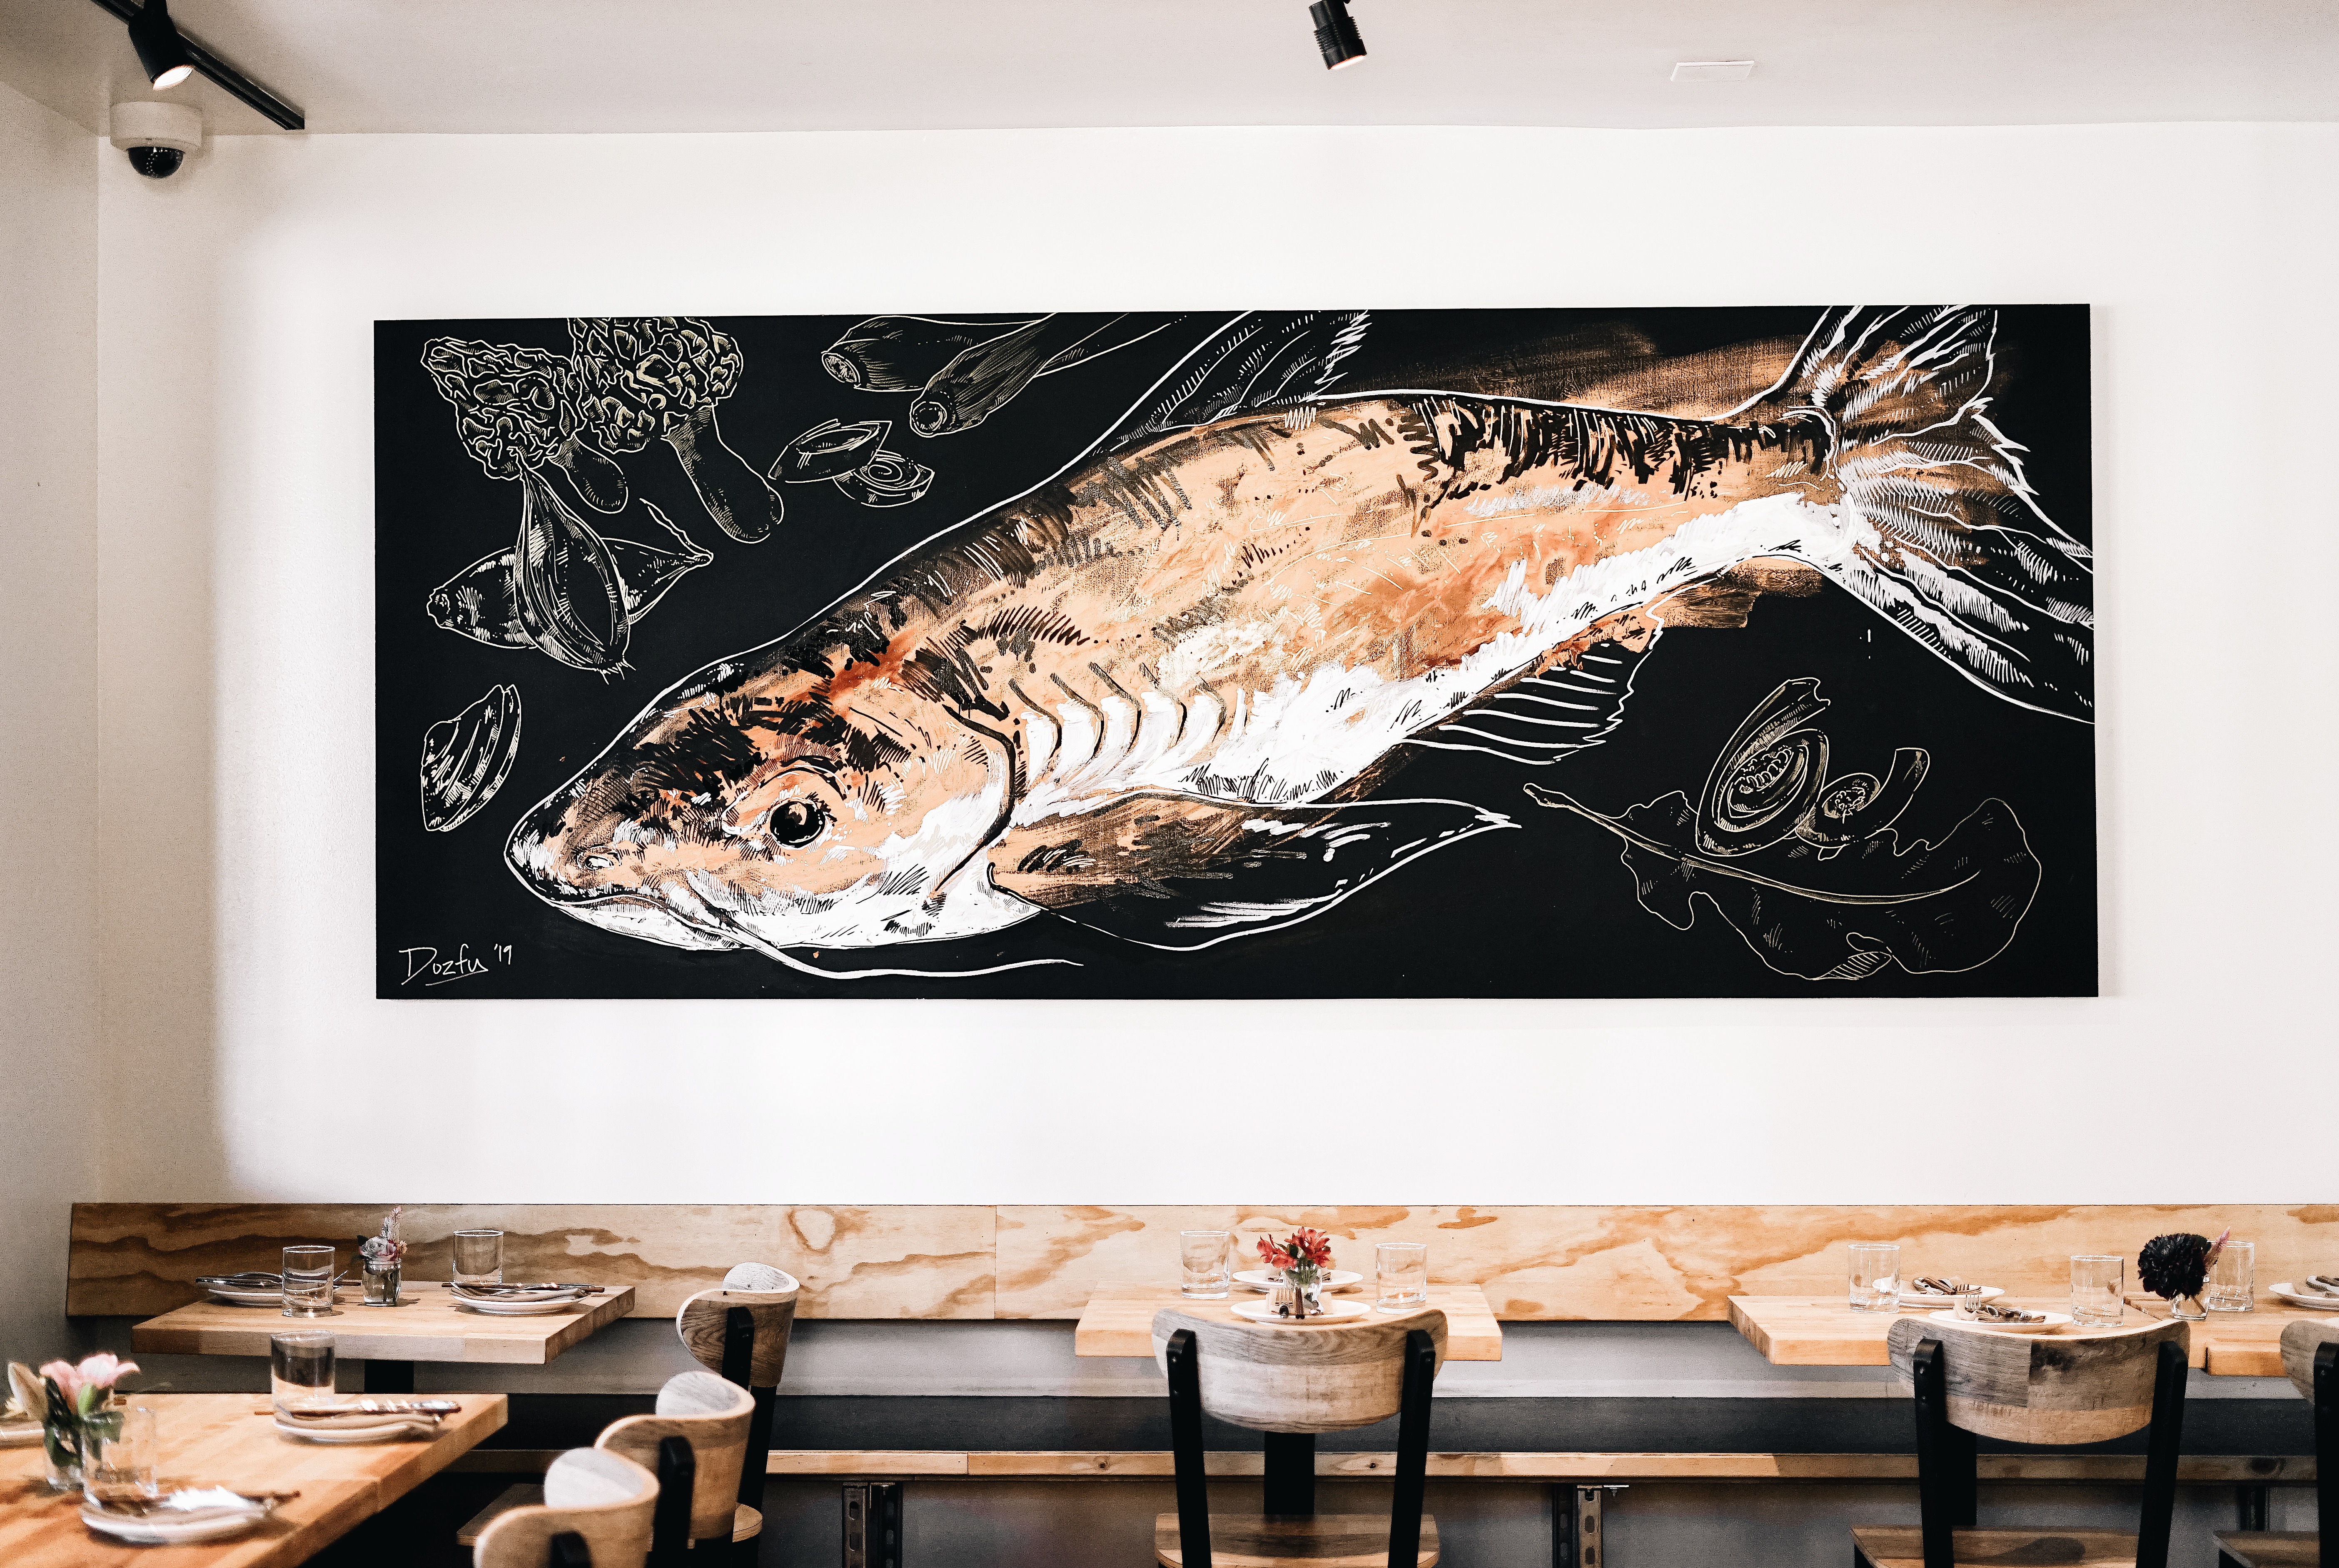 A view of a catfish mural in a light-filled dining room at the restaurant Ba Sa.